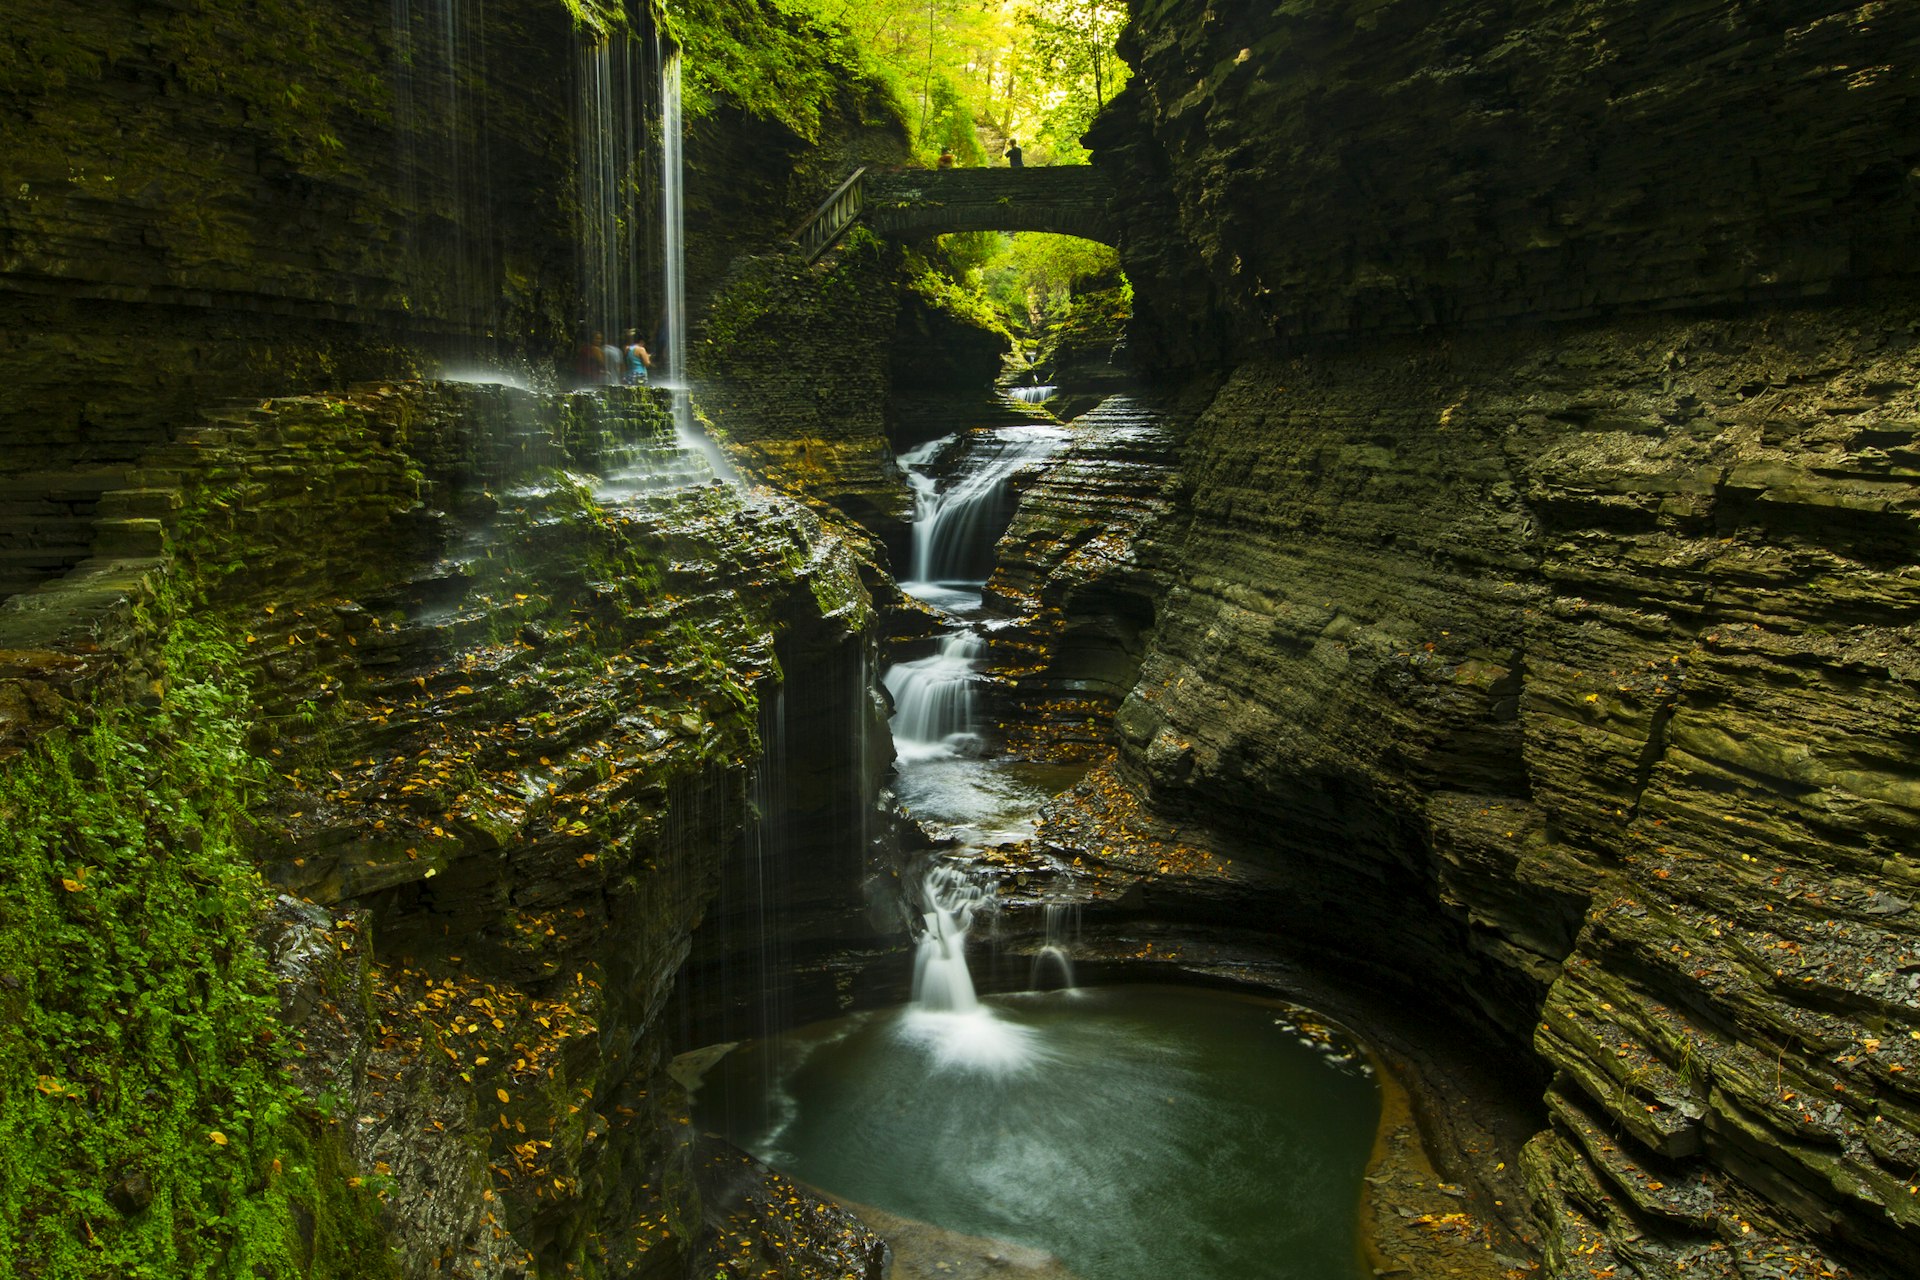 Steep rocky walls surround a waterfall in Watkins Glen State Park as people navigate the steps around them